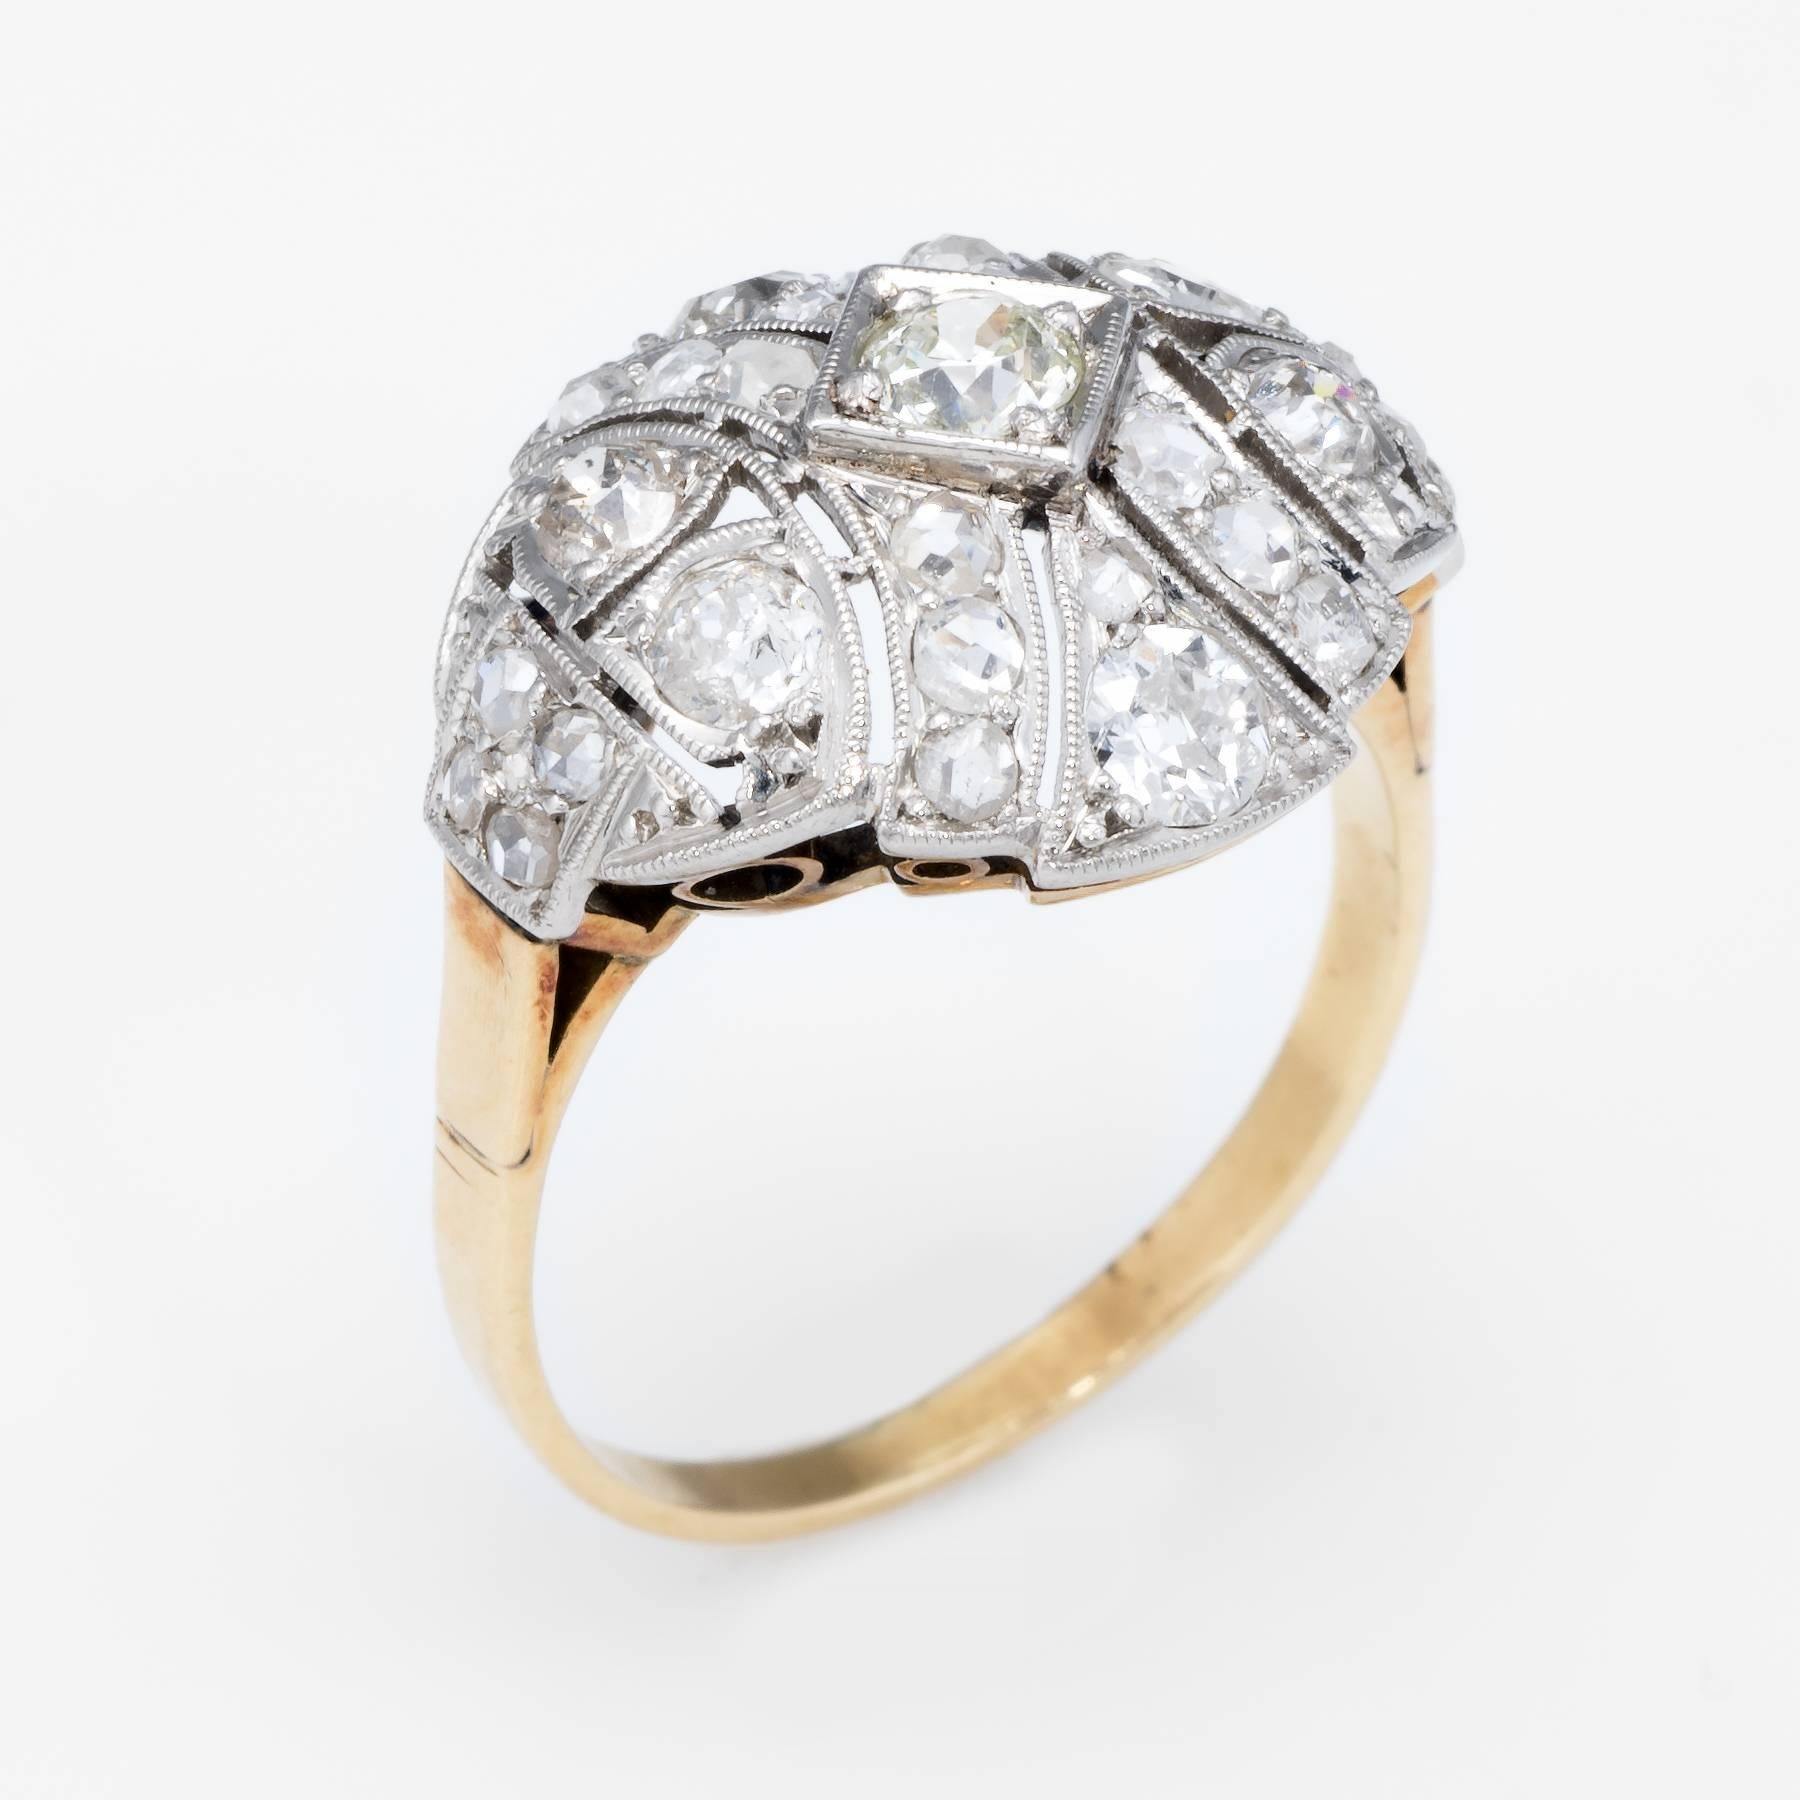 Overview:

Finely detailed vintage Art Deco era ring (circa 1920s to 1930s), crafted in 14 karat yellow & white gold. 

Centrally mounted estimated 0.20 carat old mine cut diamond is accented with rose & mine cut diamonds that range in size from